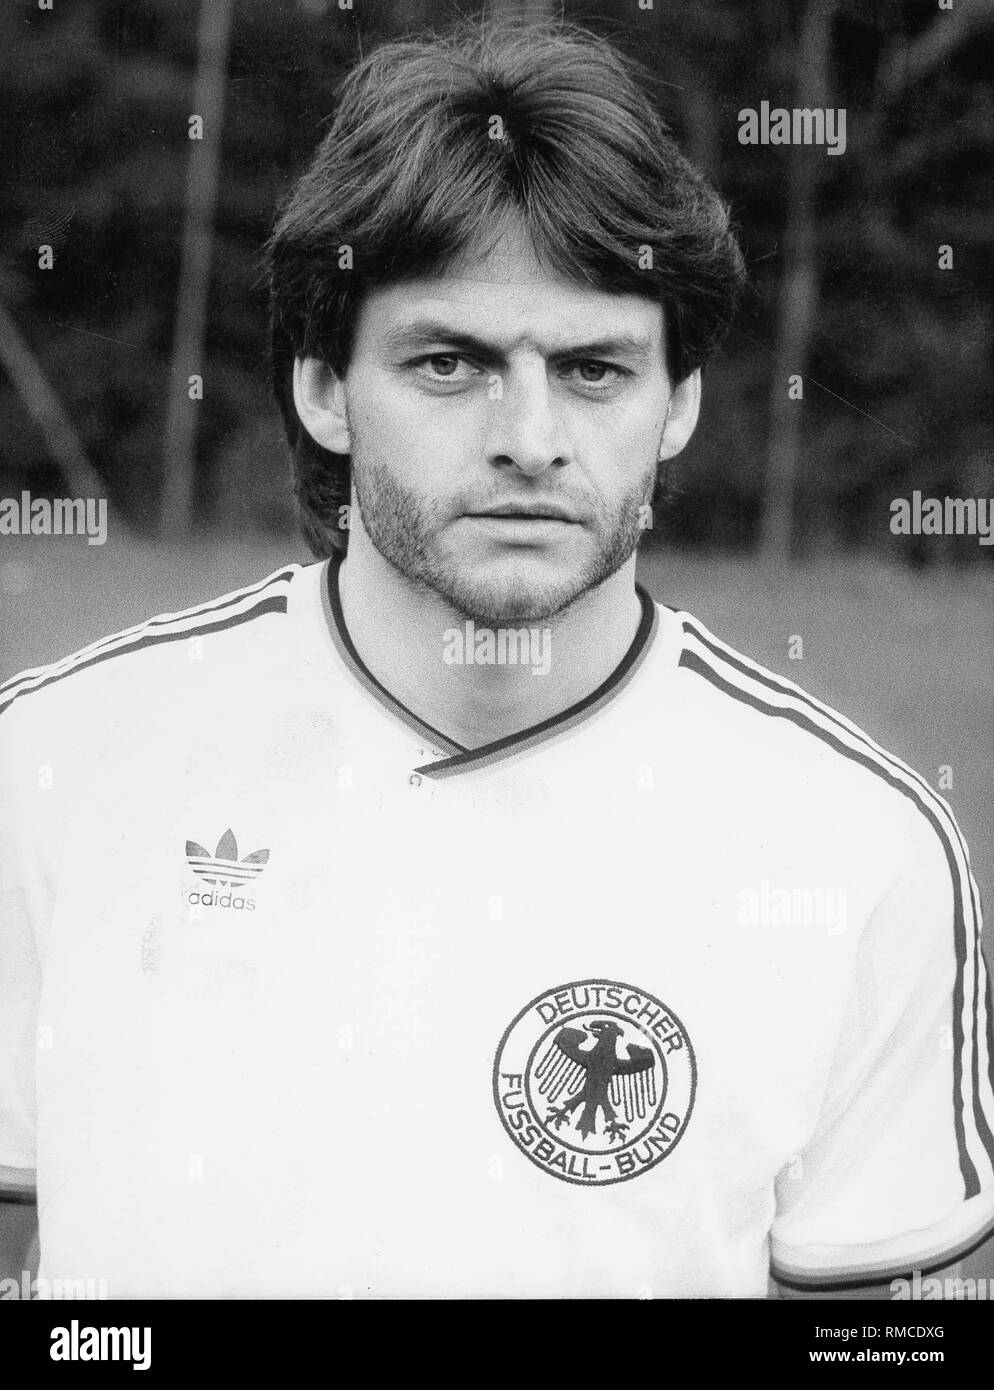 Mathias Herget in the jersey of the German national football team. Stock Photo